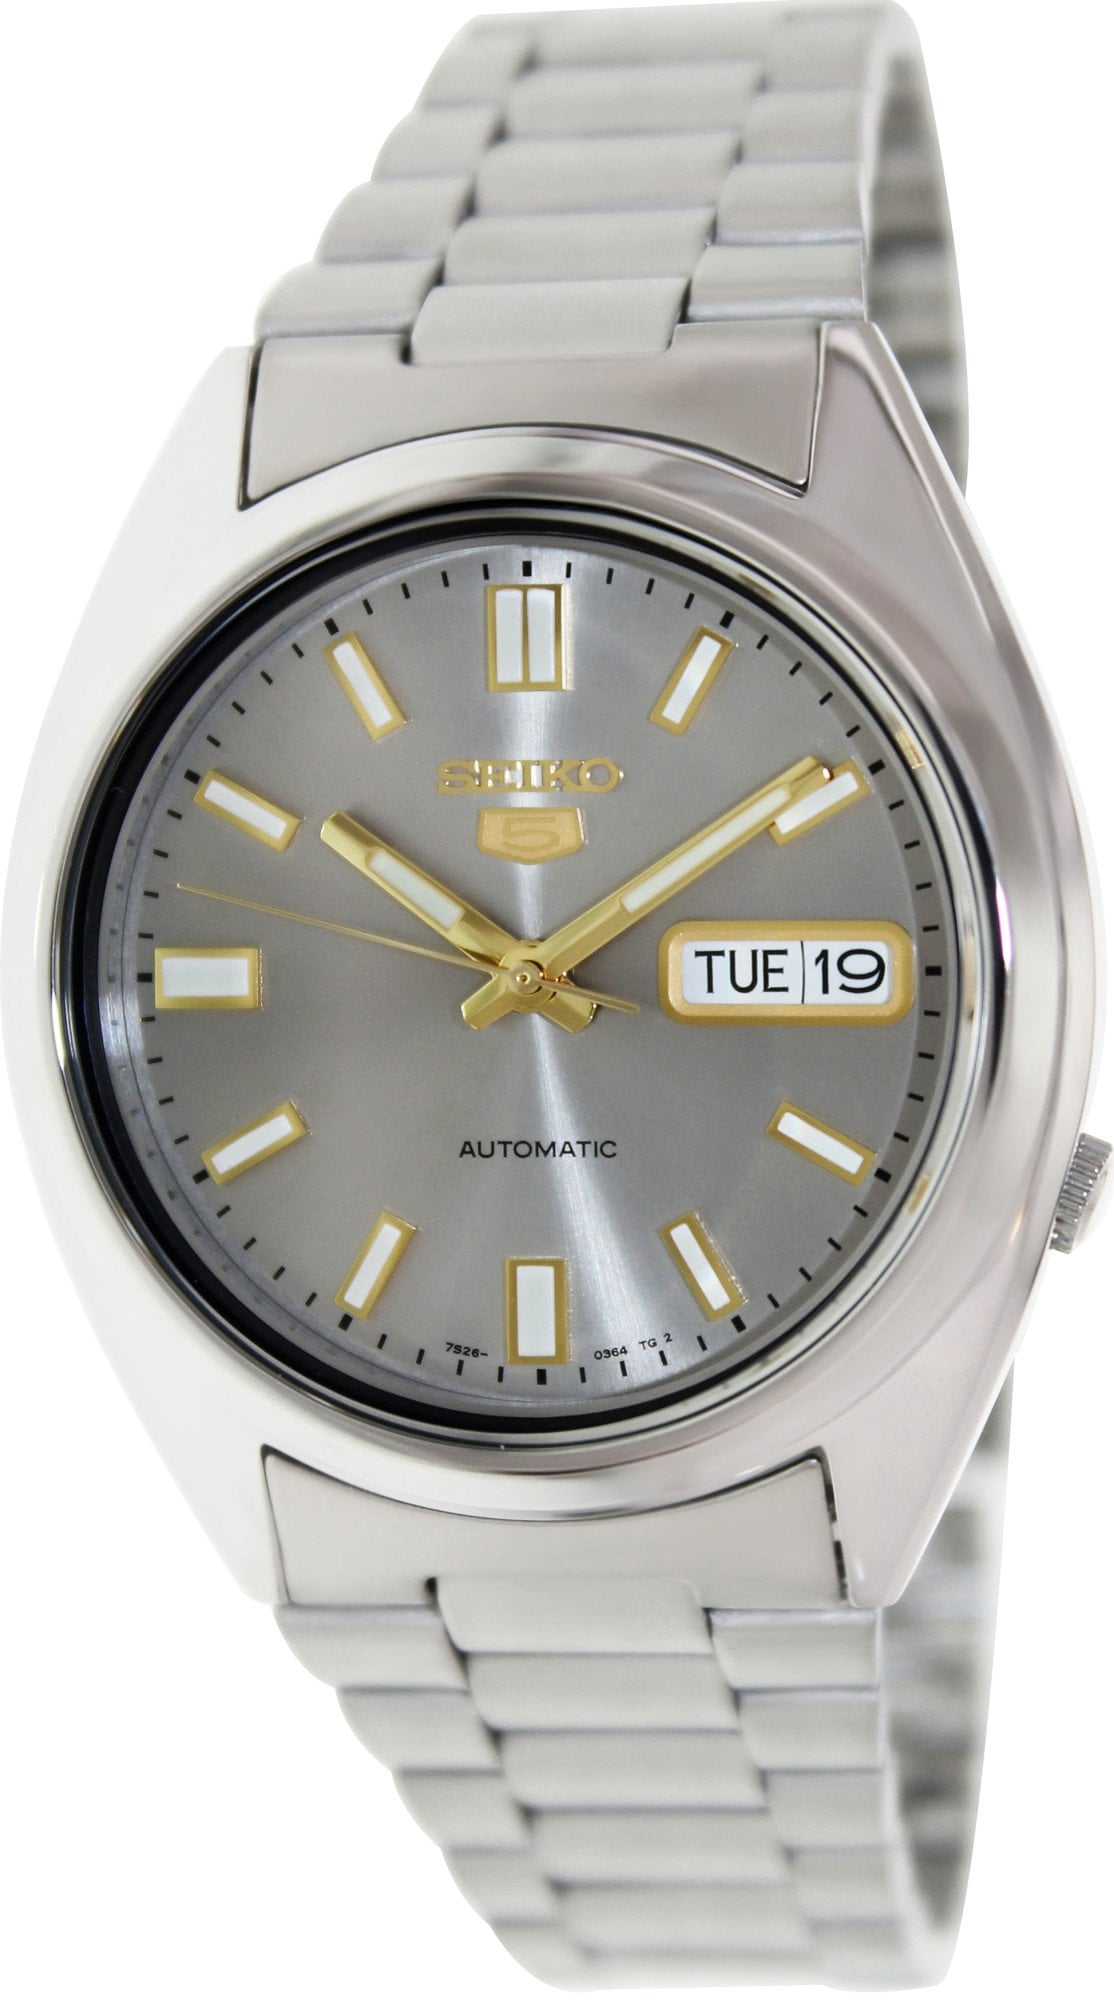 Seiko Men's 5 Automatic SNXS75K Silver Stainless-Steel Automatic ...